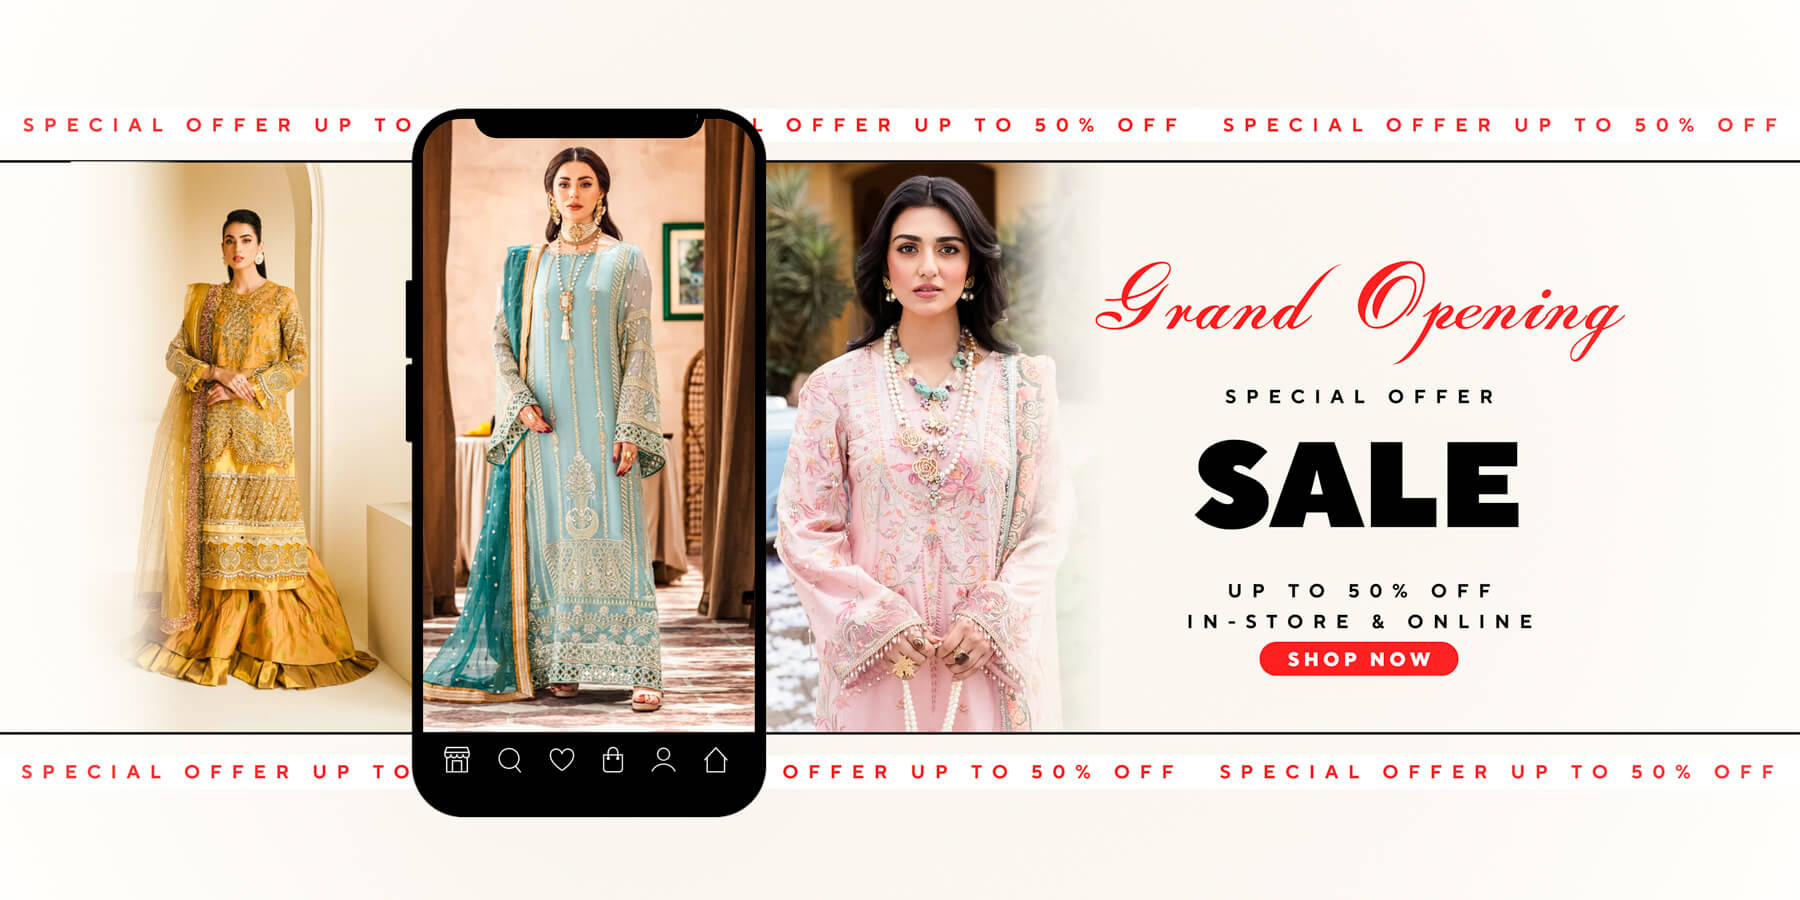 US Based Brands Outlet Pakistani Clothing Store and Online Sale
– RANGREZA USA
